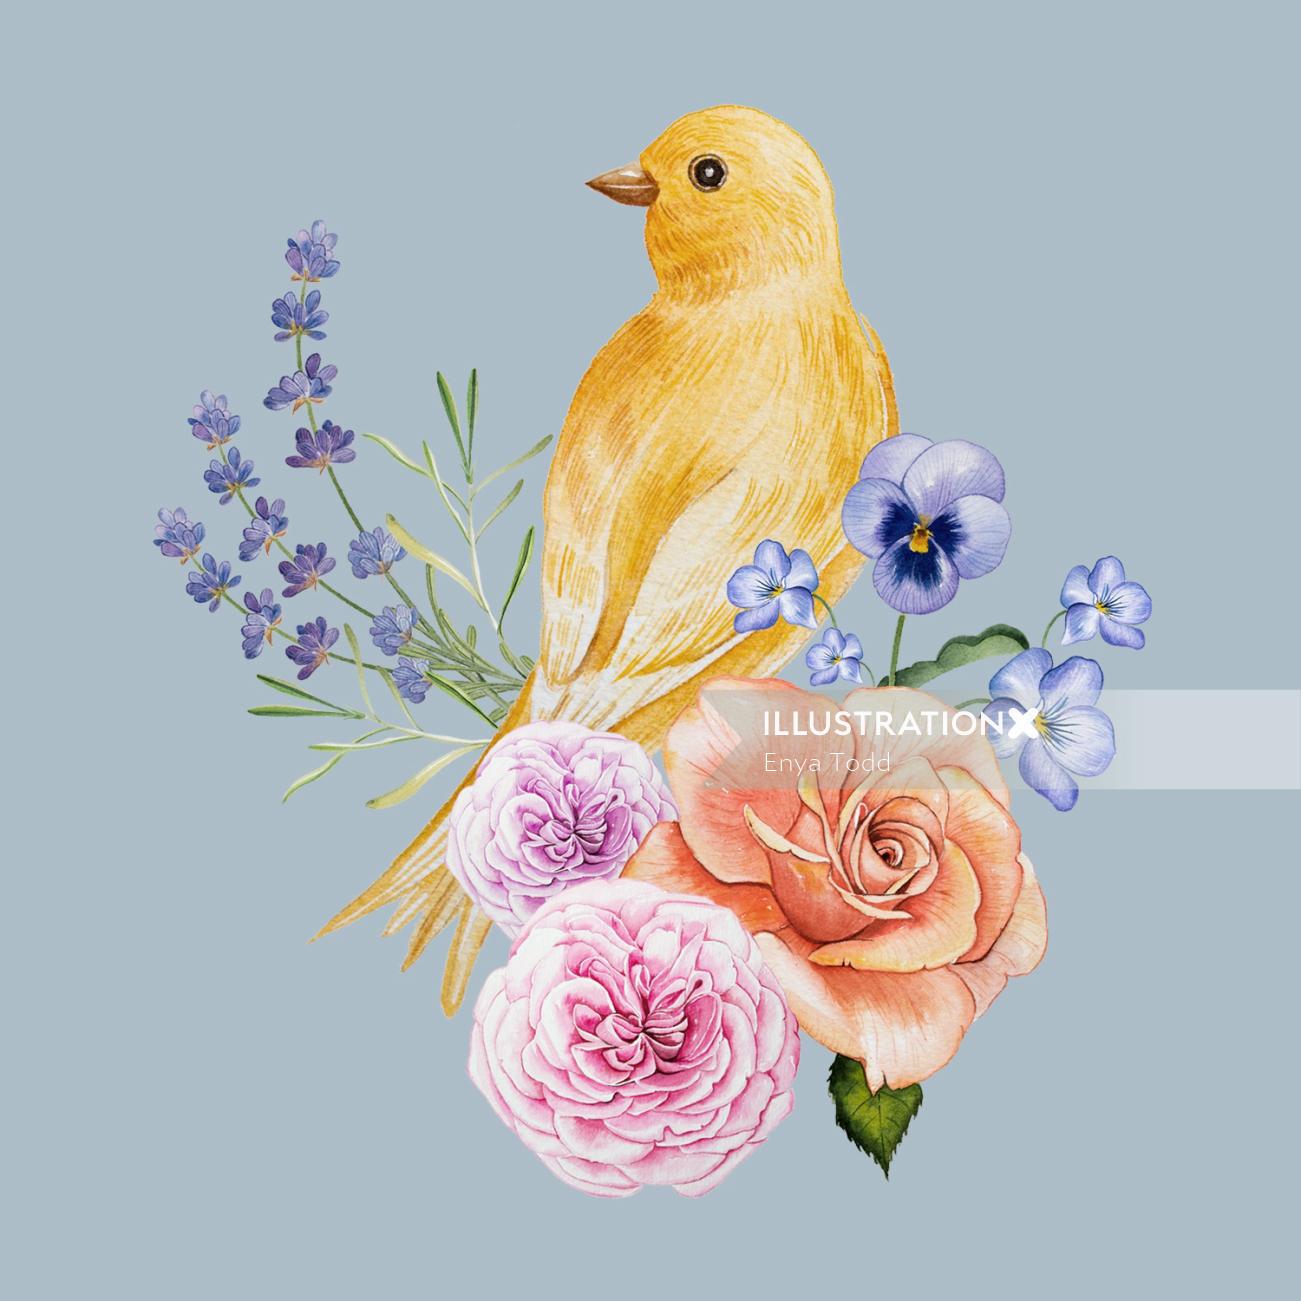 Contemporary art of bird and flowers